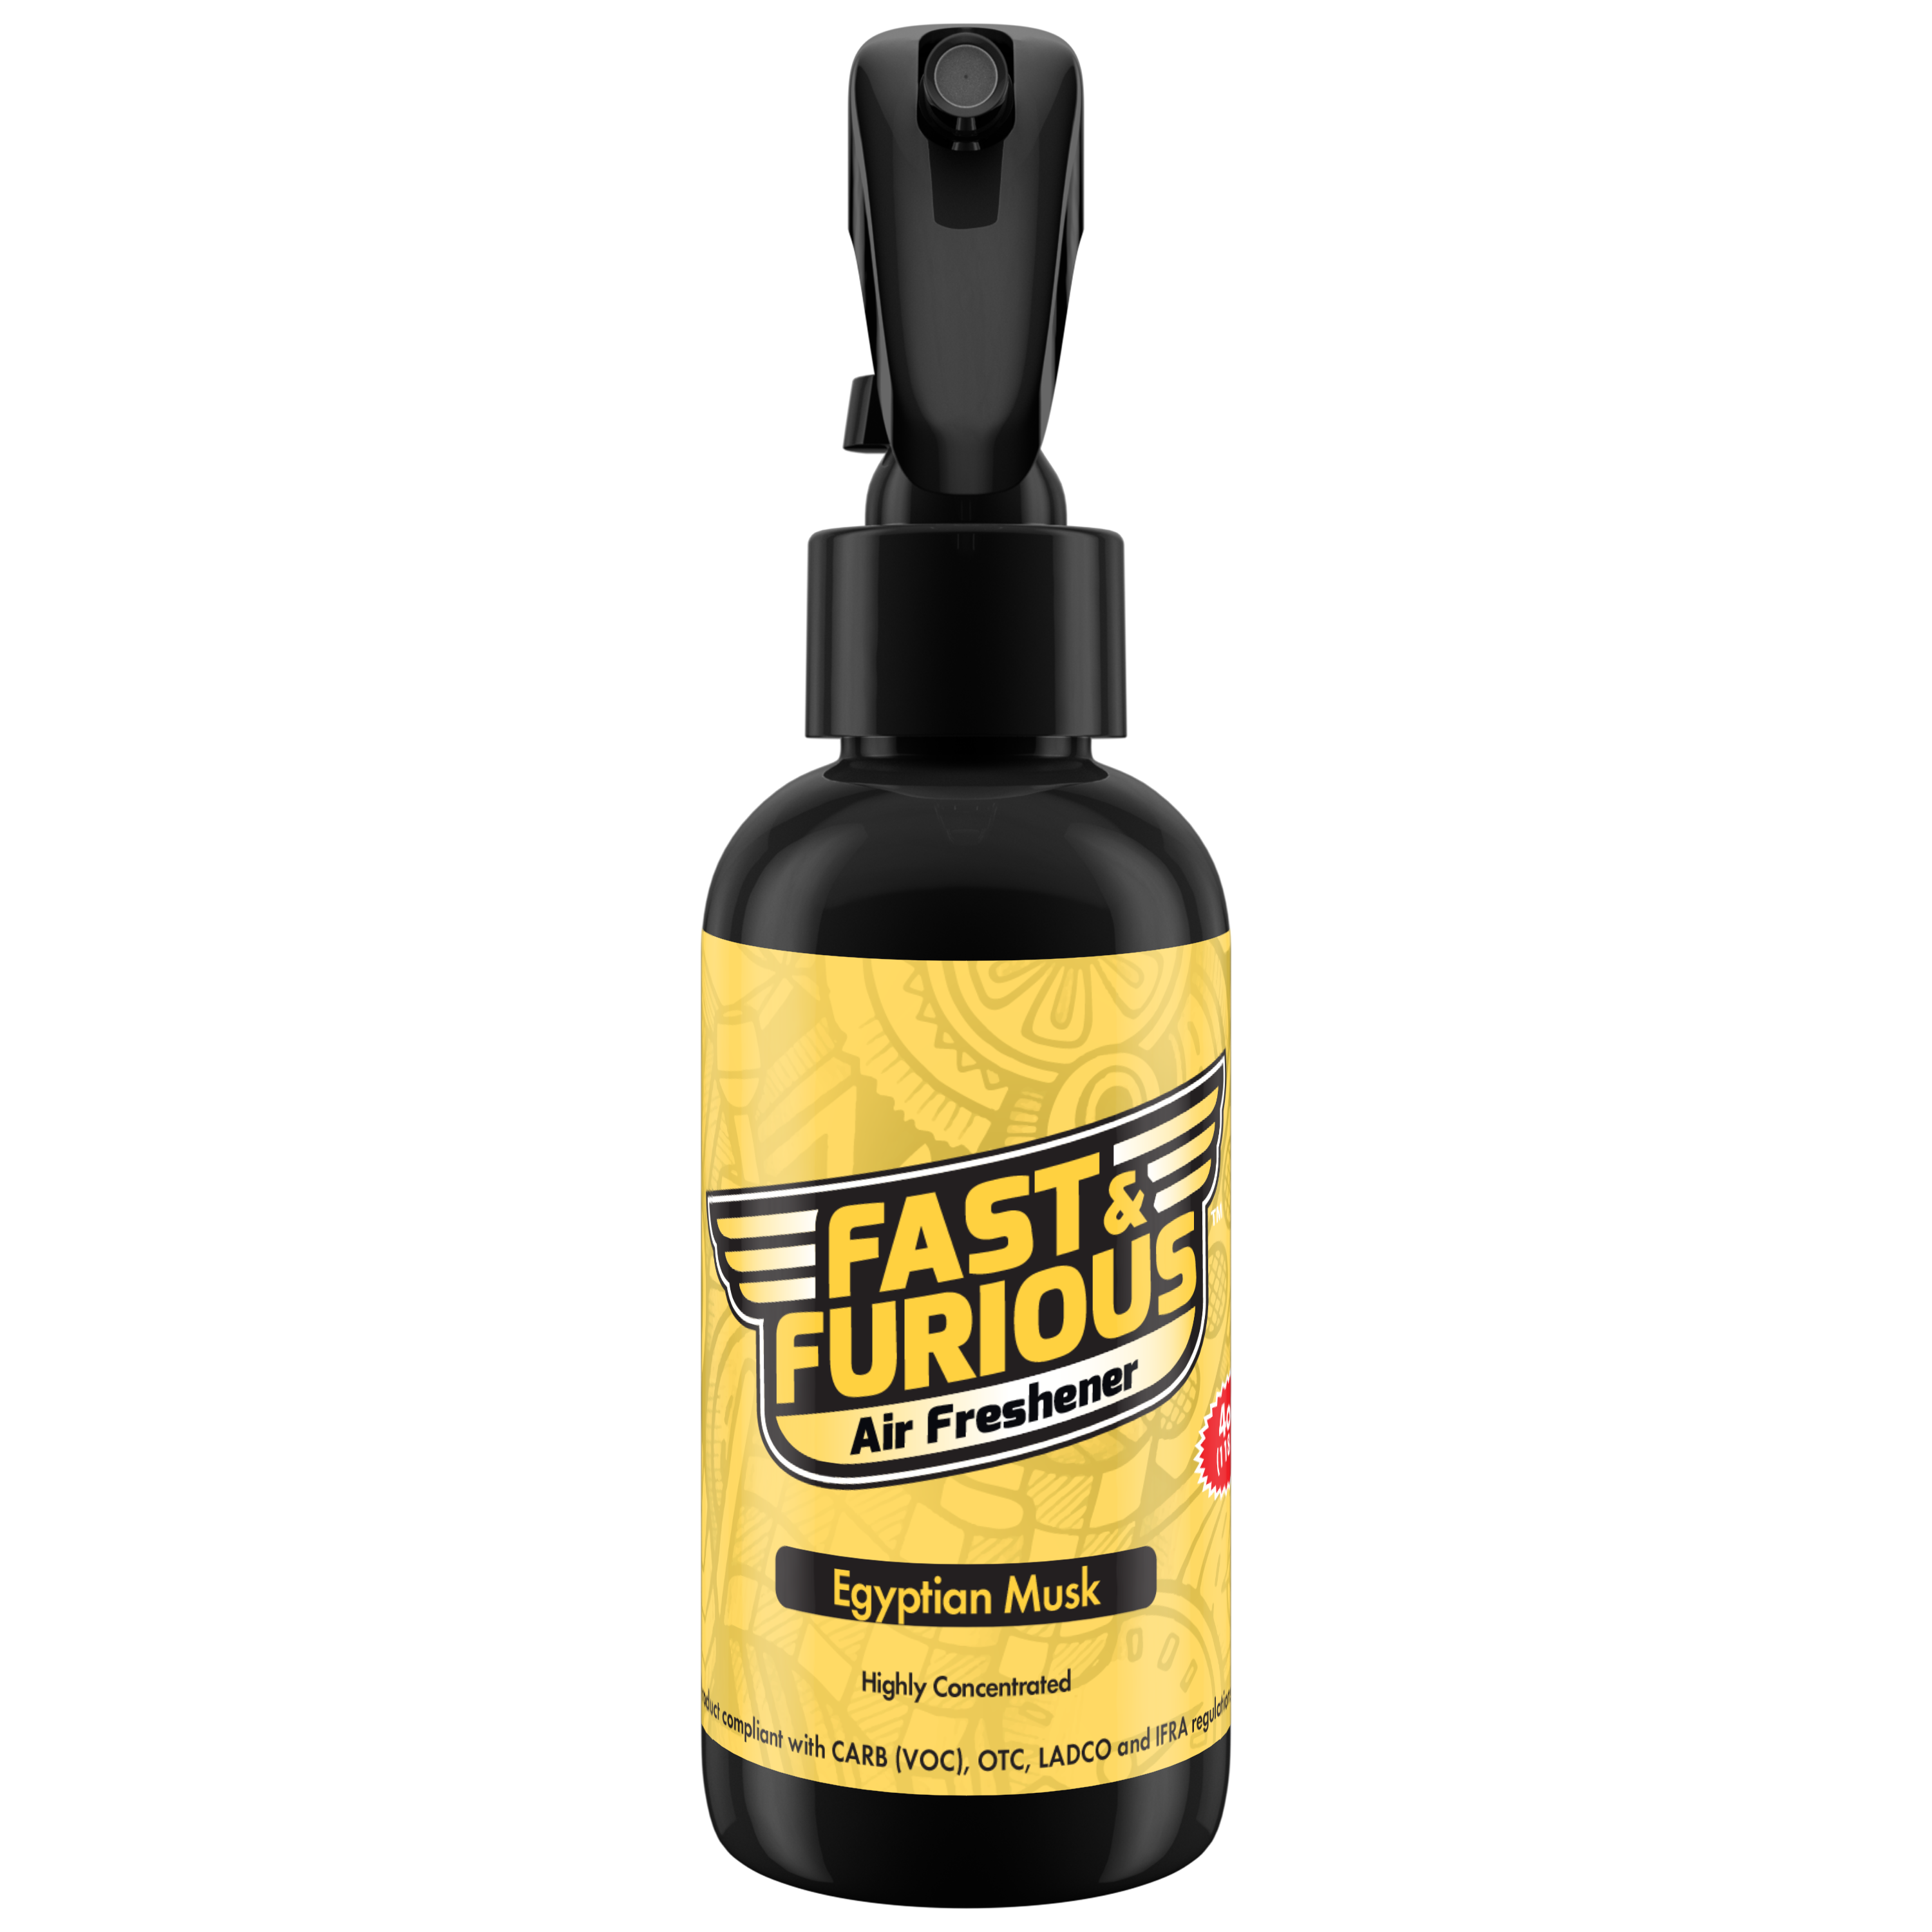 Fast and Furious Air Freshener - Egyptian Musk Scent